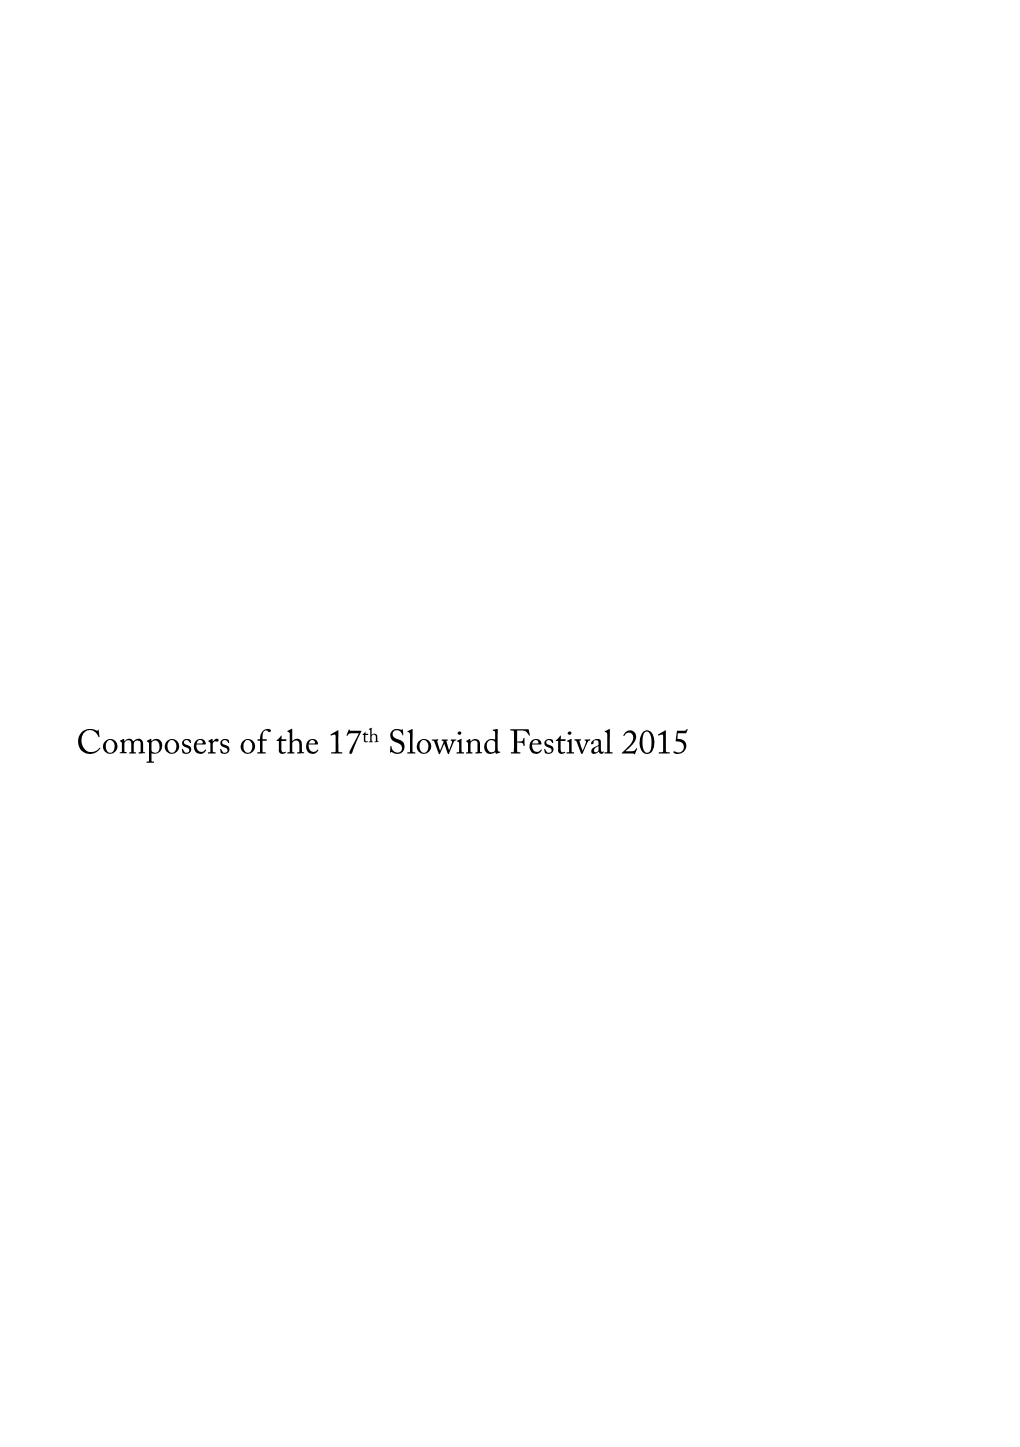 Composers of the 17Th Slowind Festival 2015 Modern, the Ensemble Intercontemporain, the Minguet Quartet and the Munich Chamber Orchestra